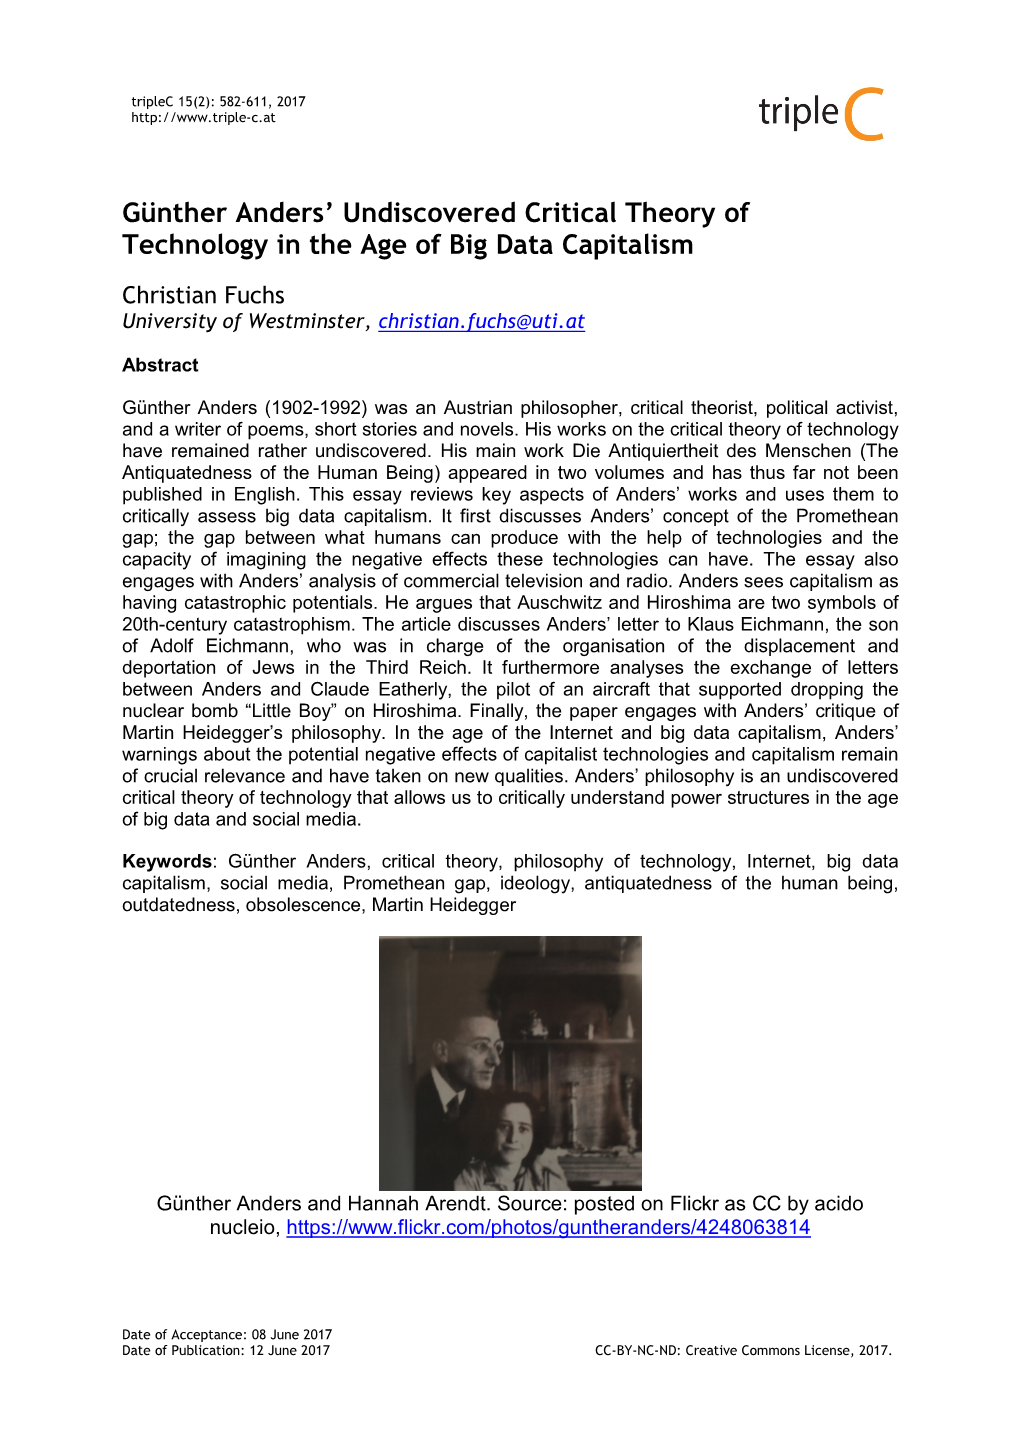 Günther Anders' Undiscovered Critical Theory of Technology in the Age Of